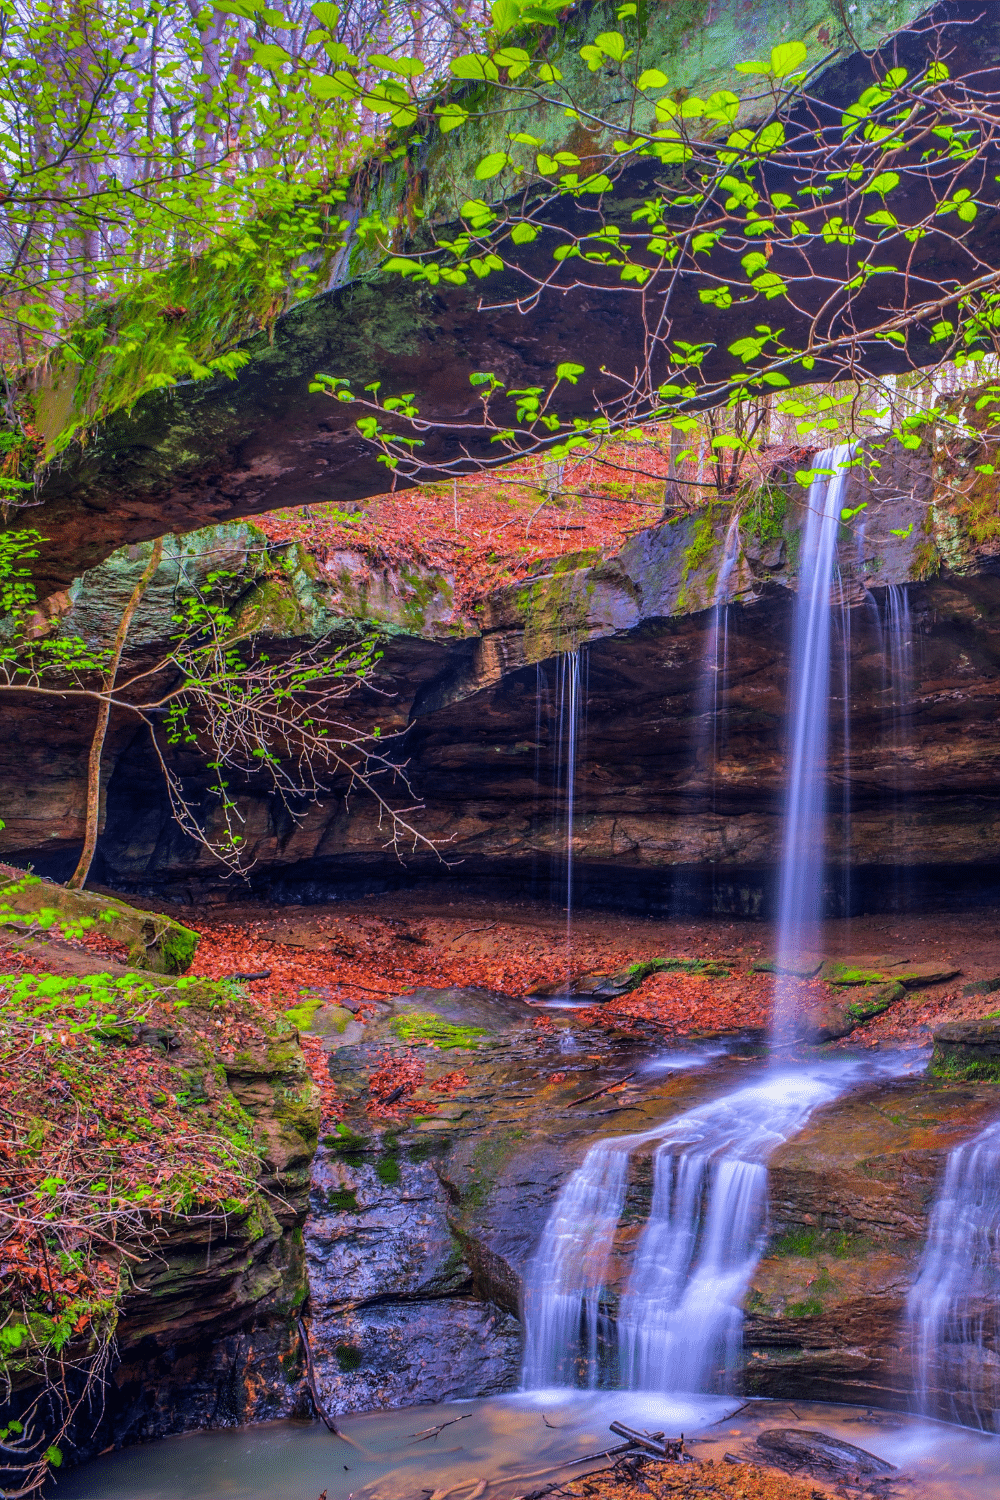 Water falling into a stream. Colourful leaves of red and green are scattered on the ground